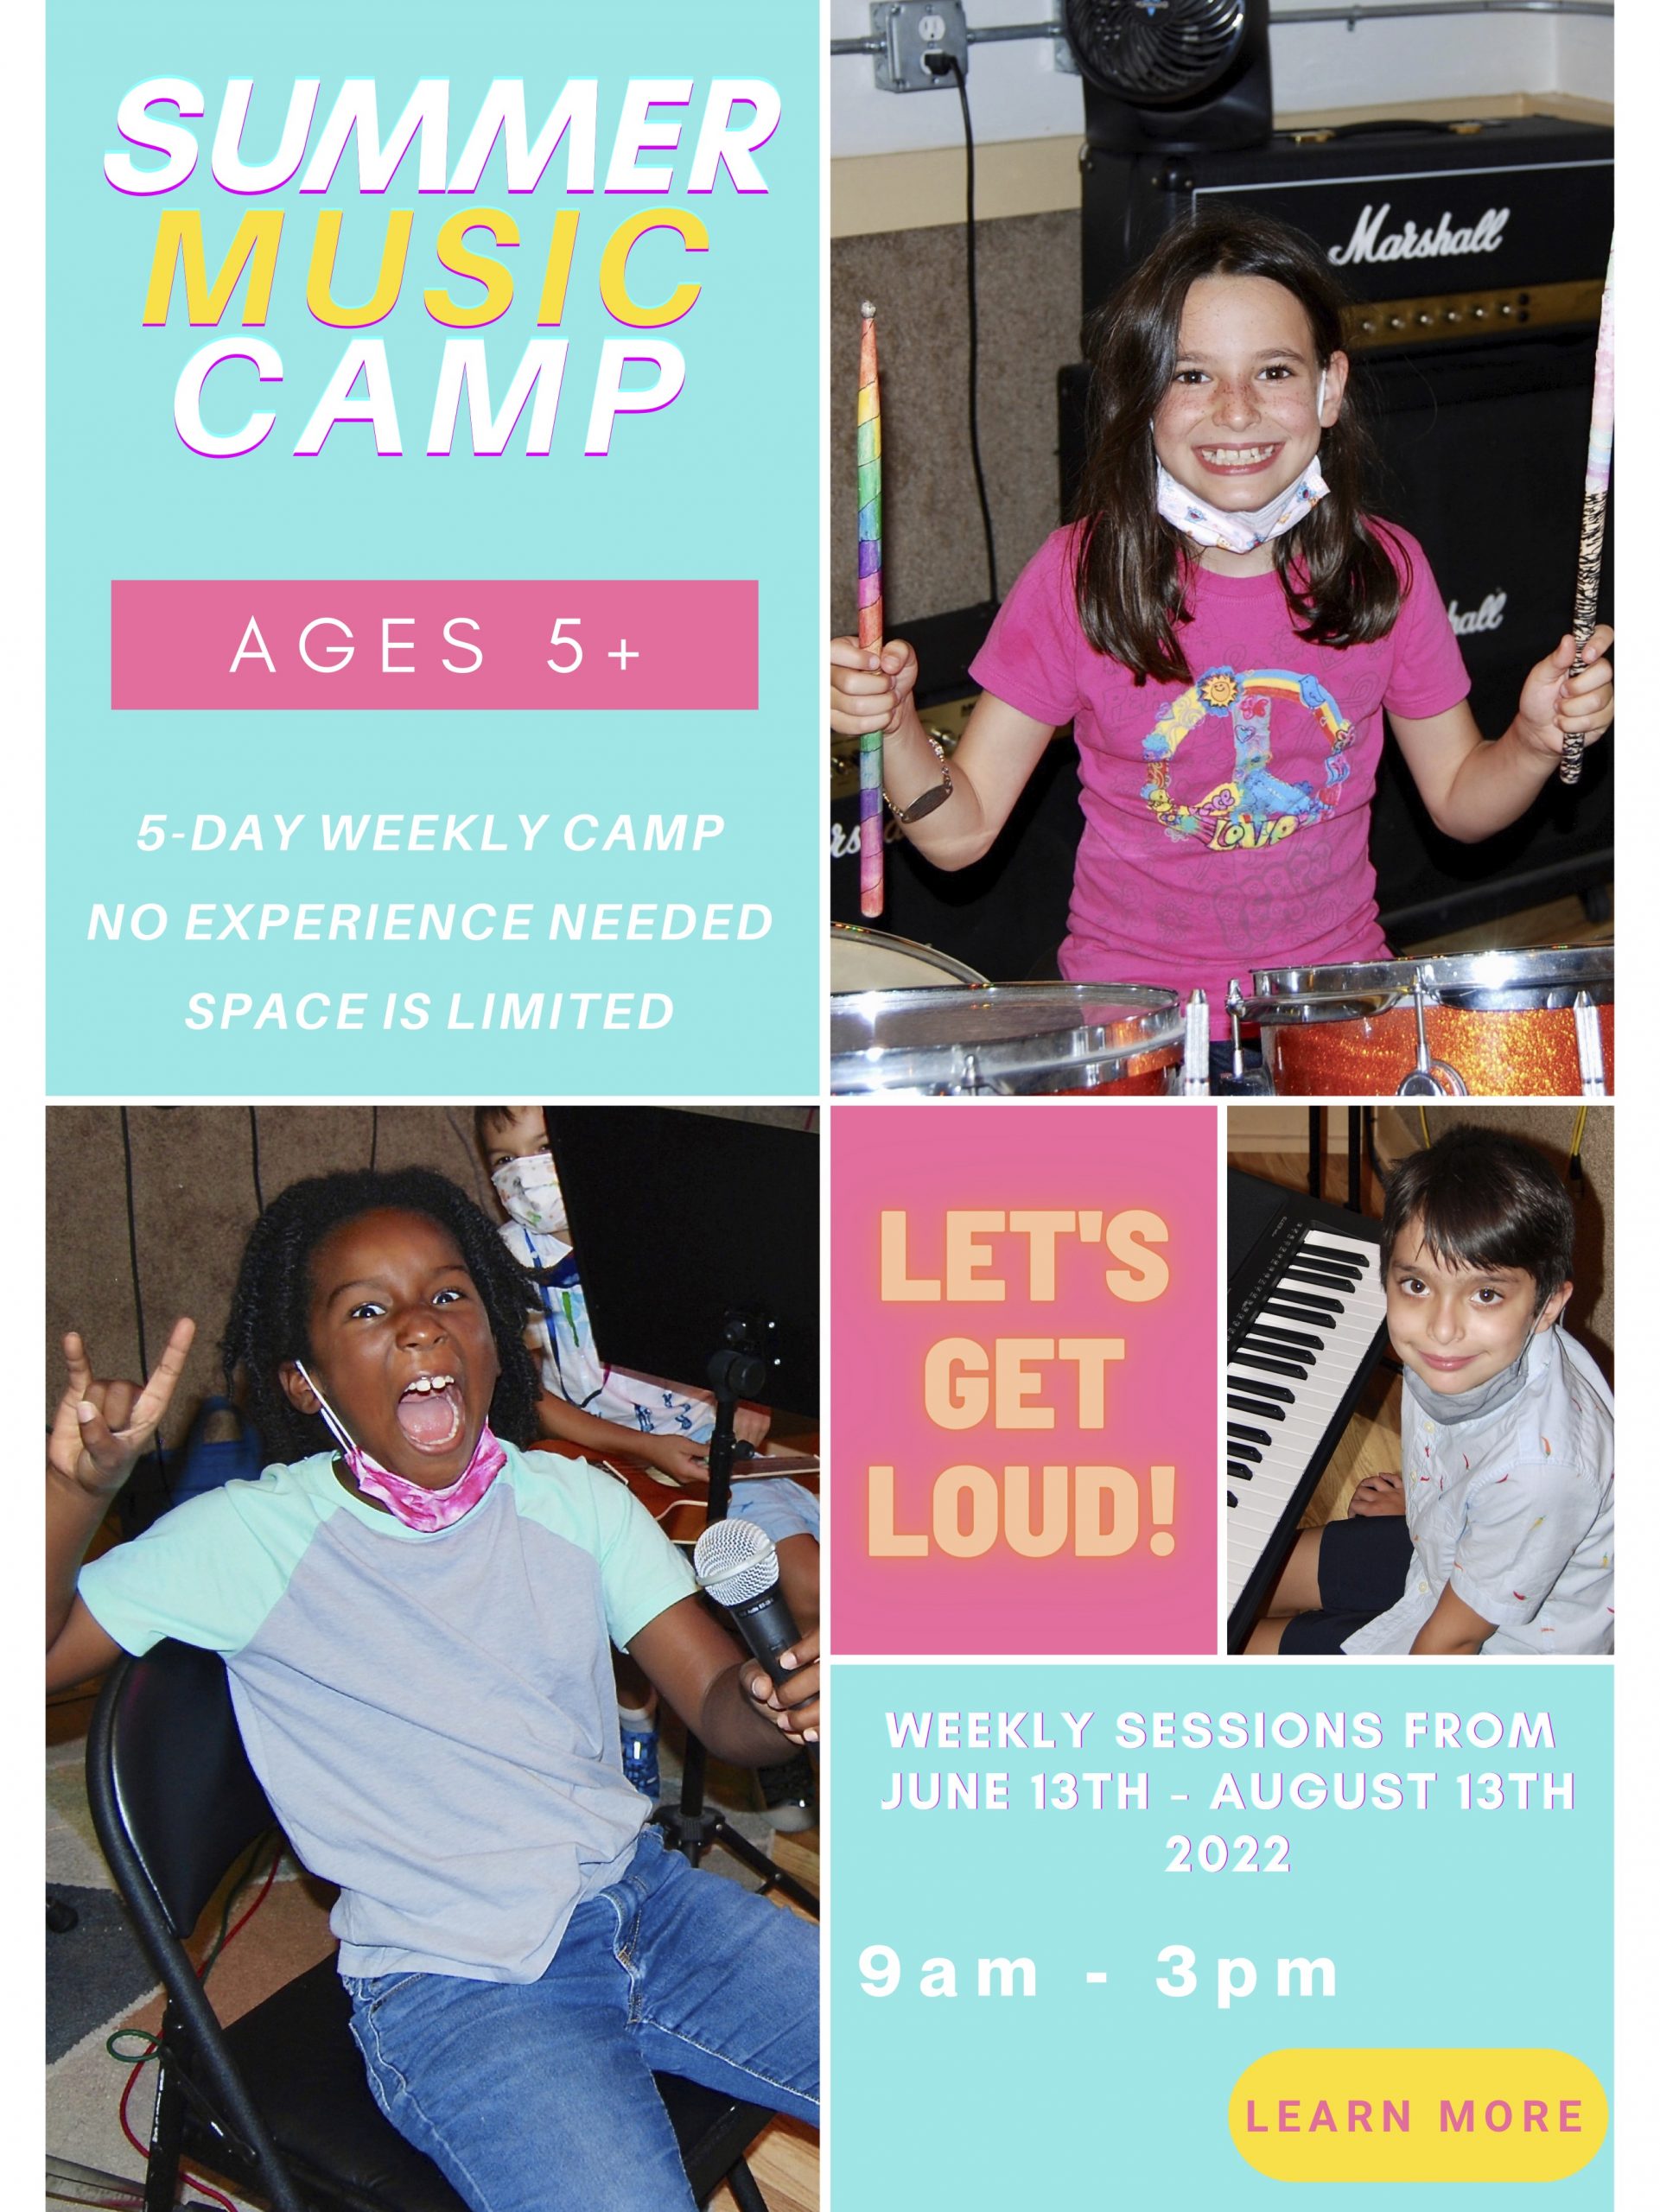 SUMMER MUSIC CAMPS IN LOS ANGELES